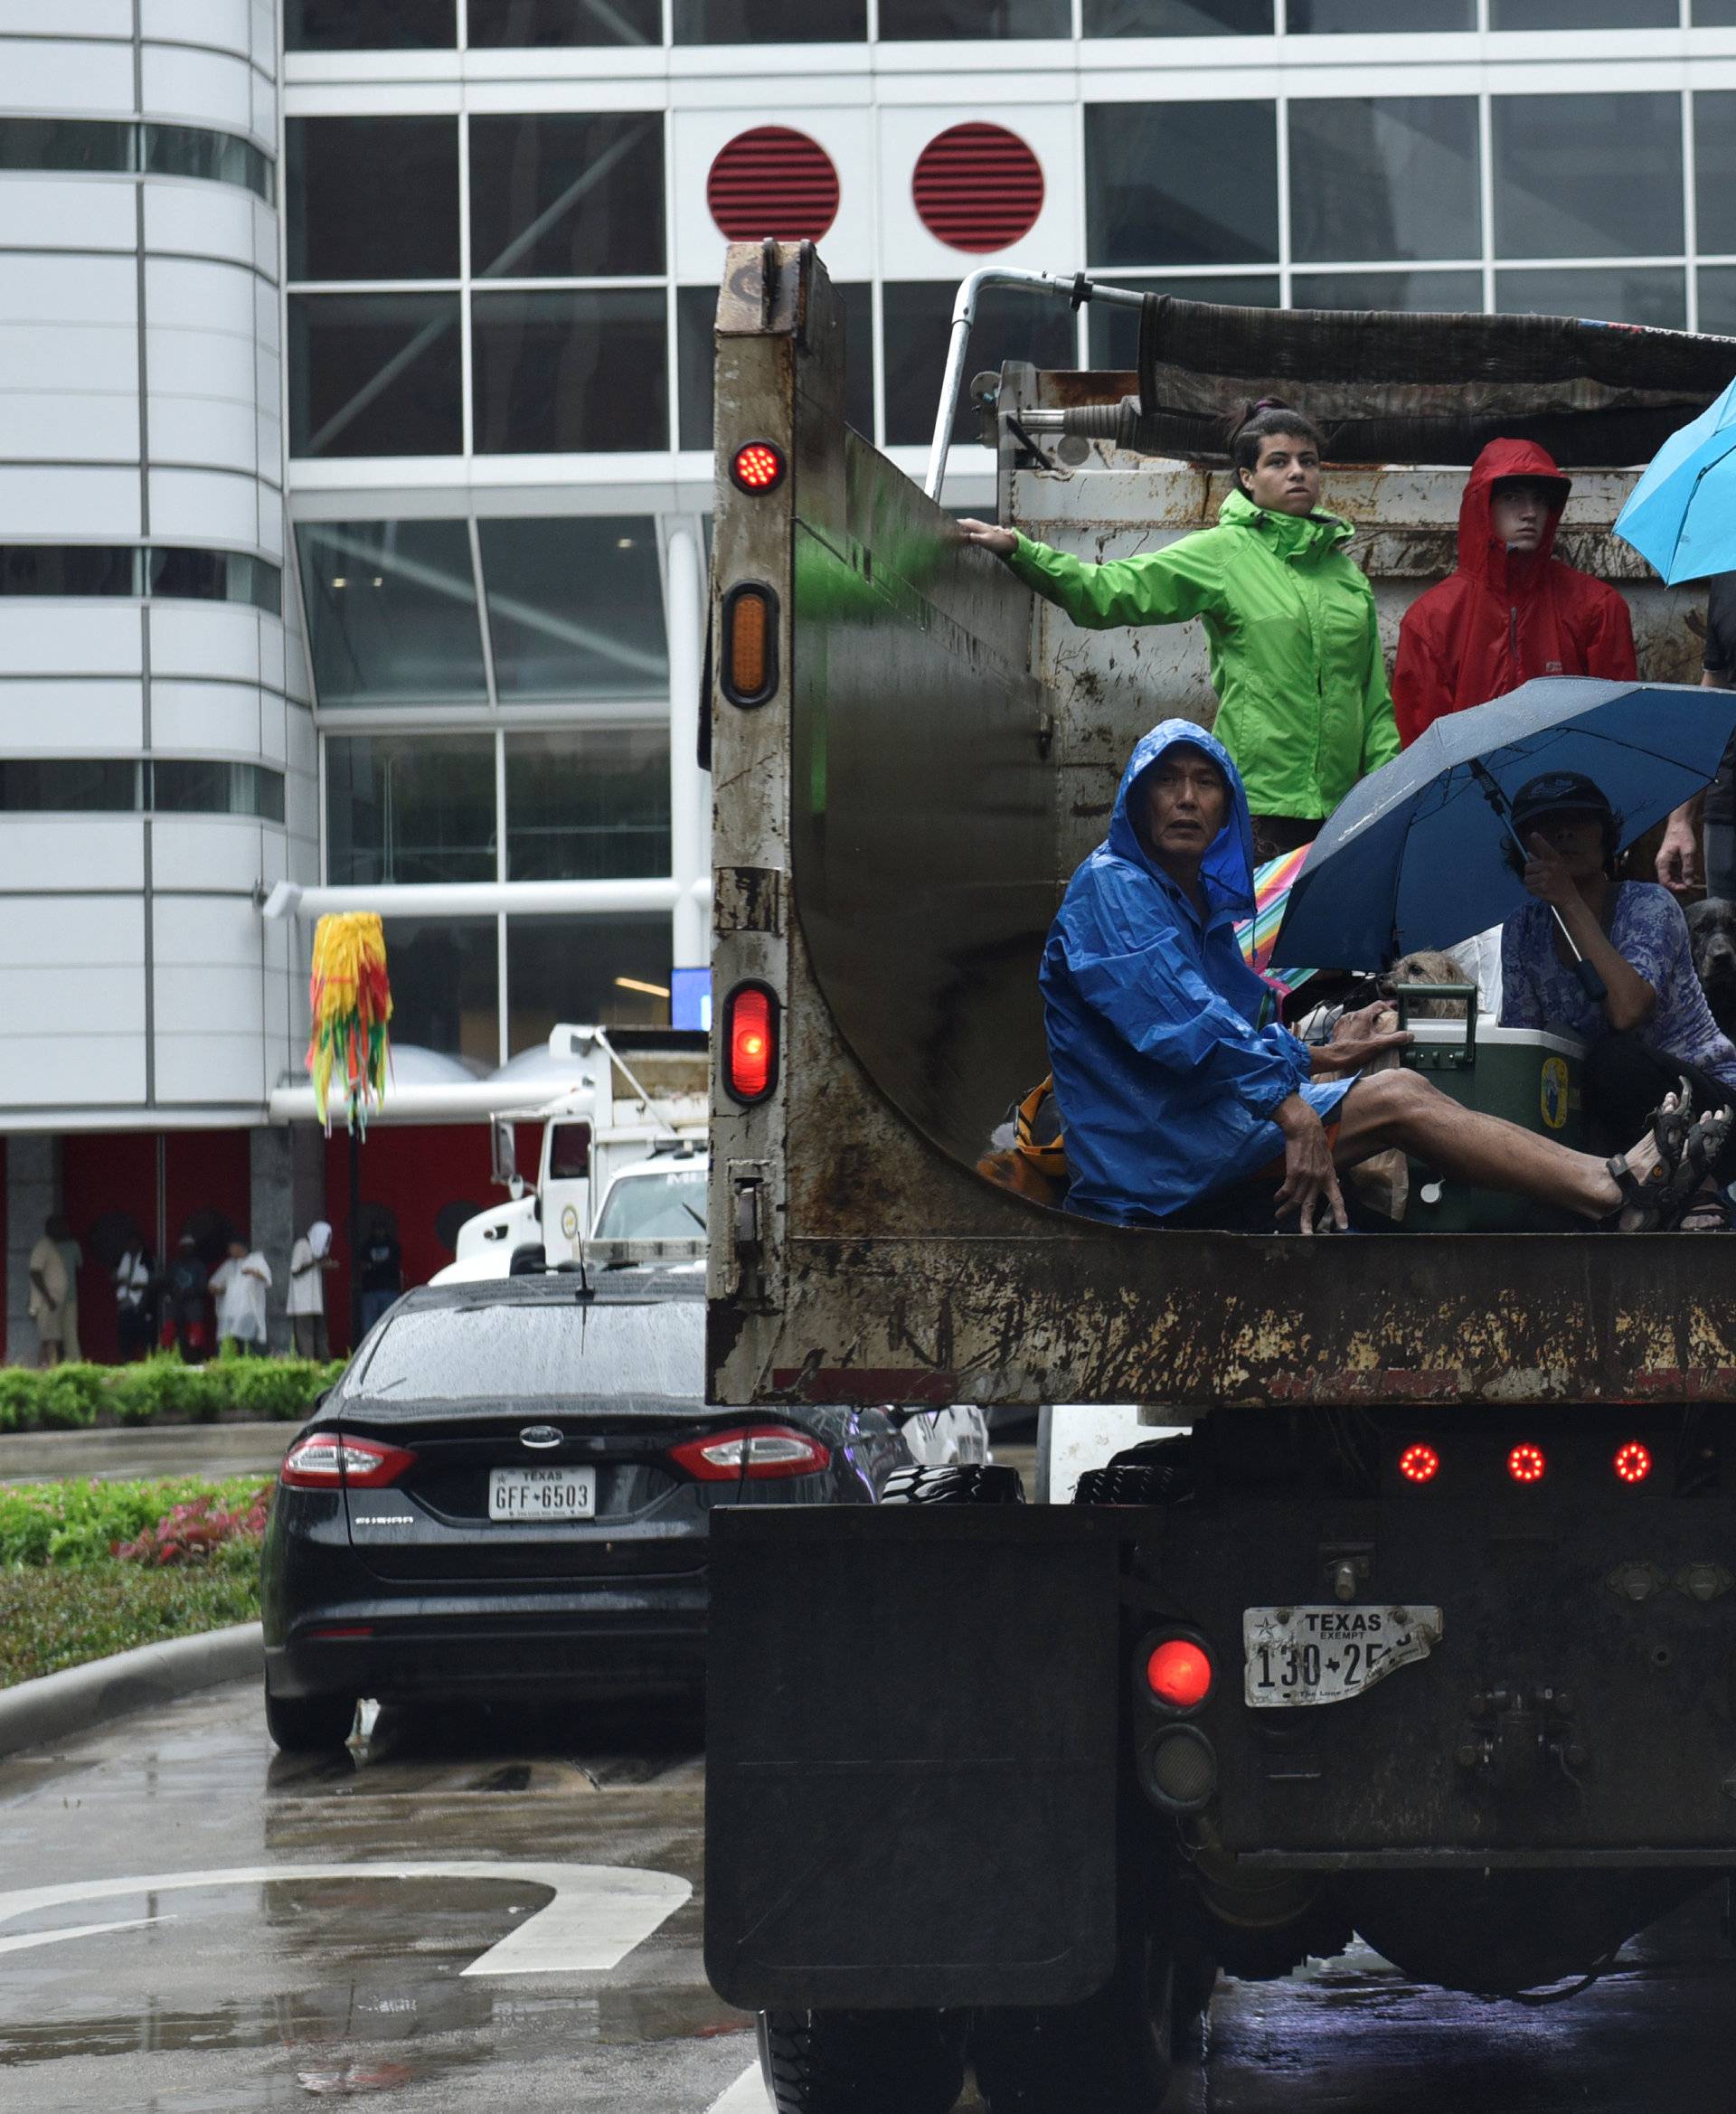 Evacuees are transported to the George R. Brown Convention Center after Hurricane Harvey inundated the Texas Gulf coast with rain causing widespread flooding